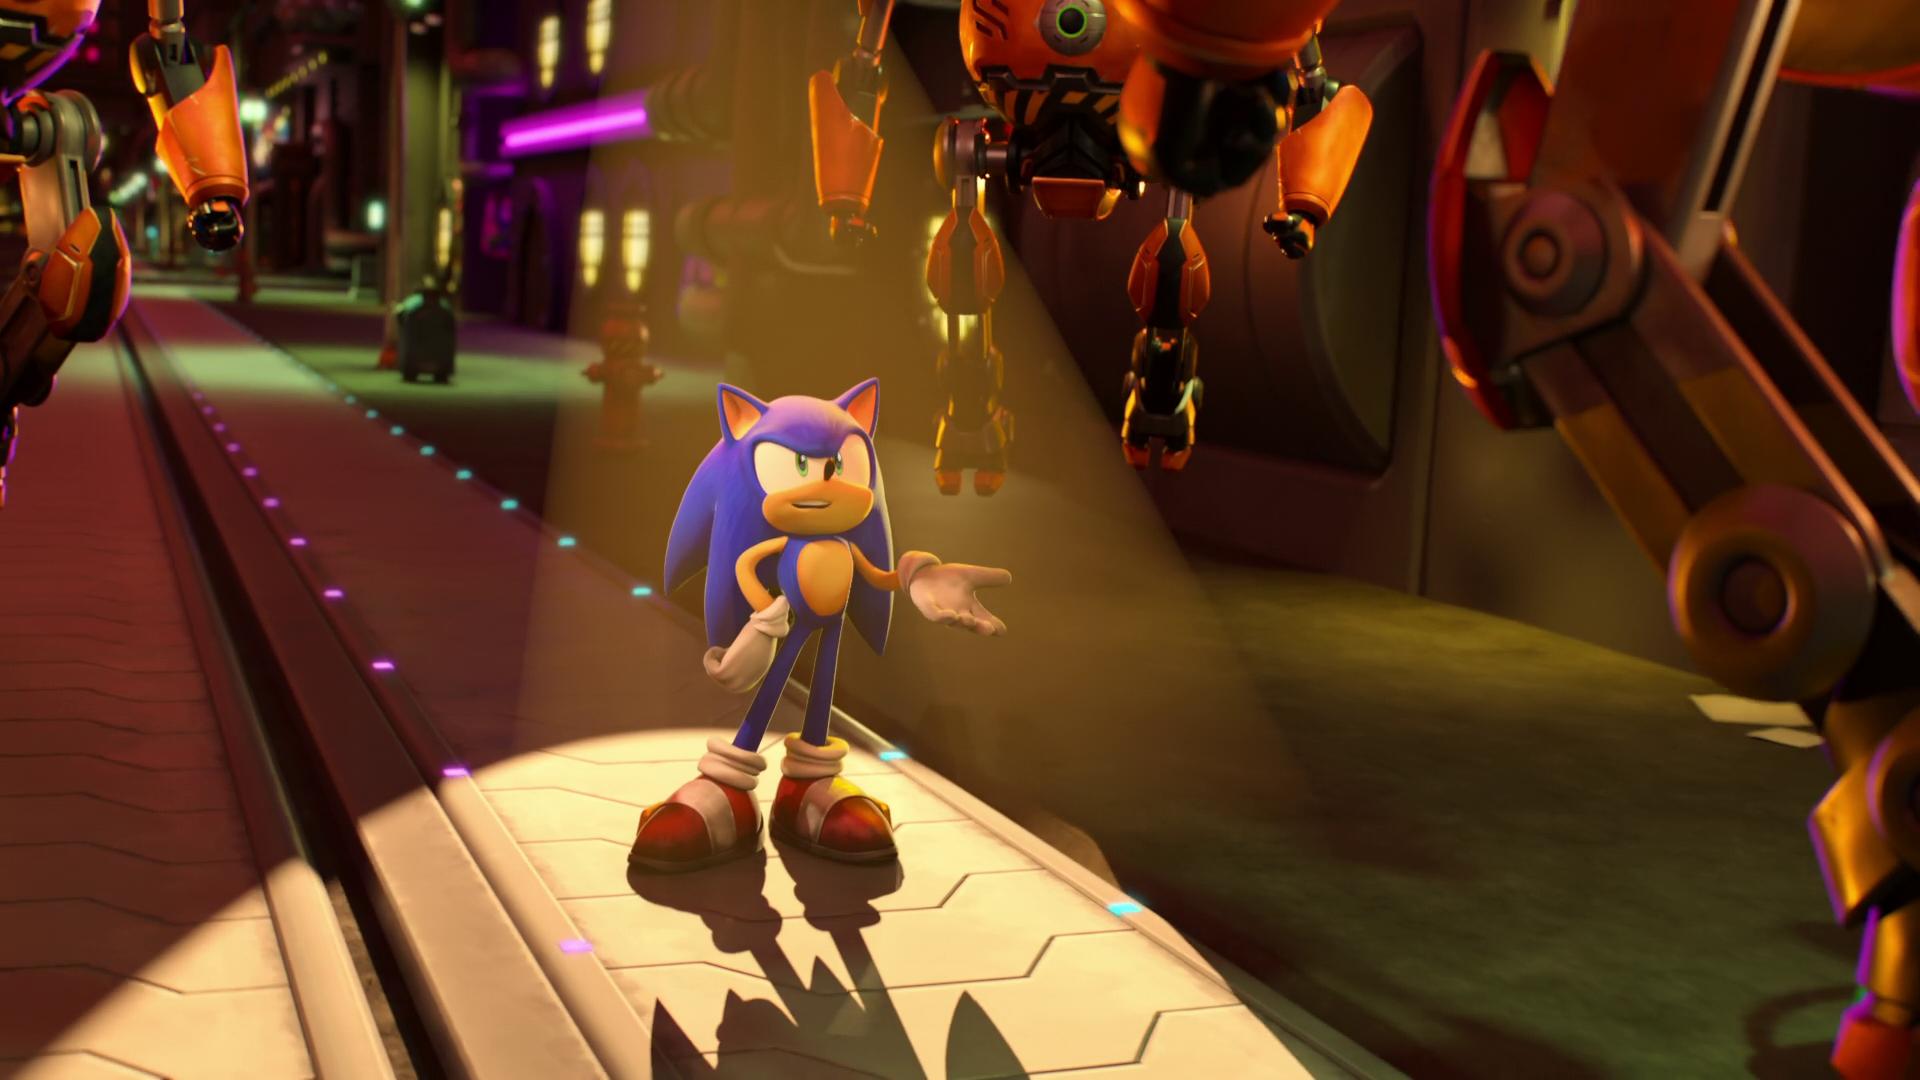 New Sonic Prime Images Reveal Shattered Takes on Iconic Sonic the